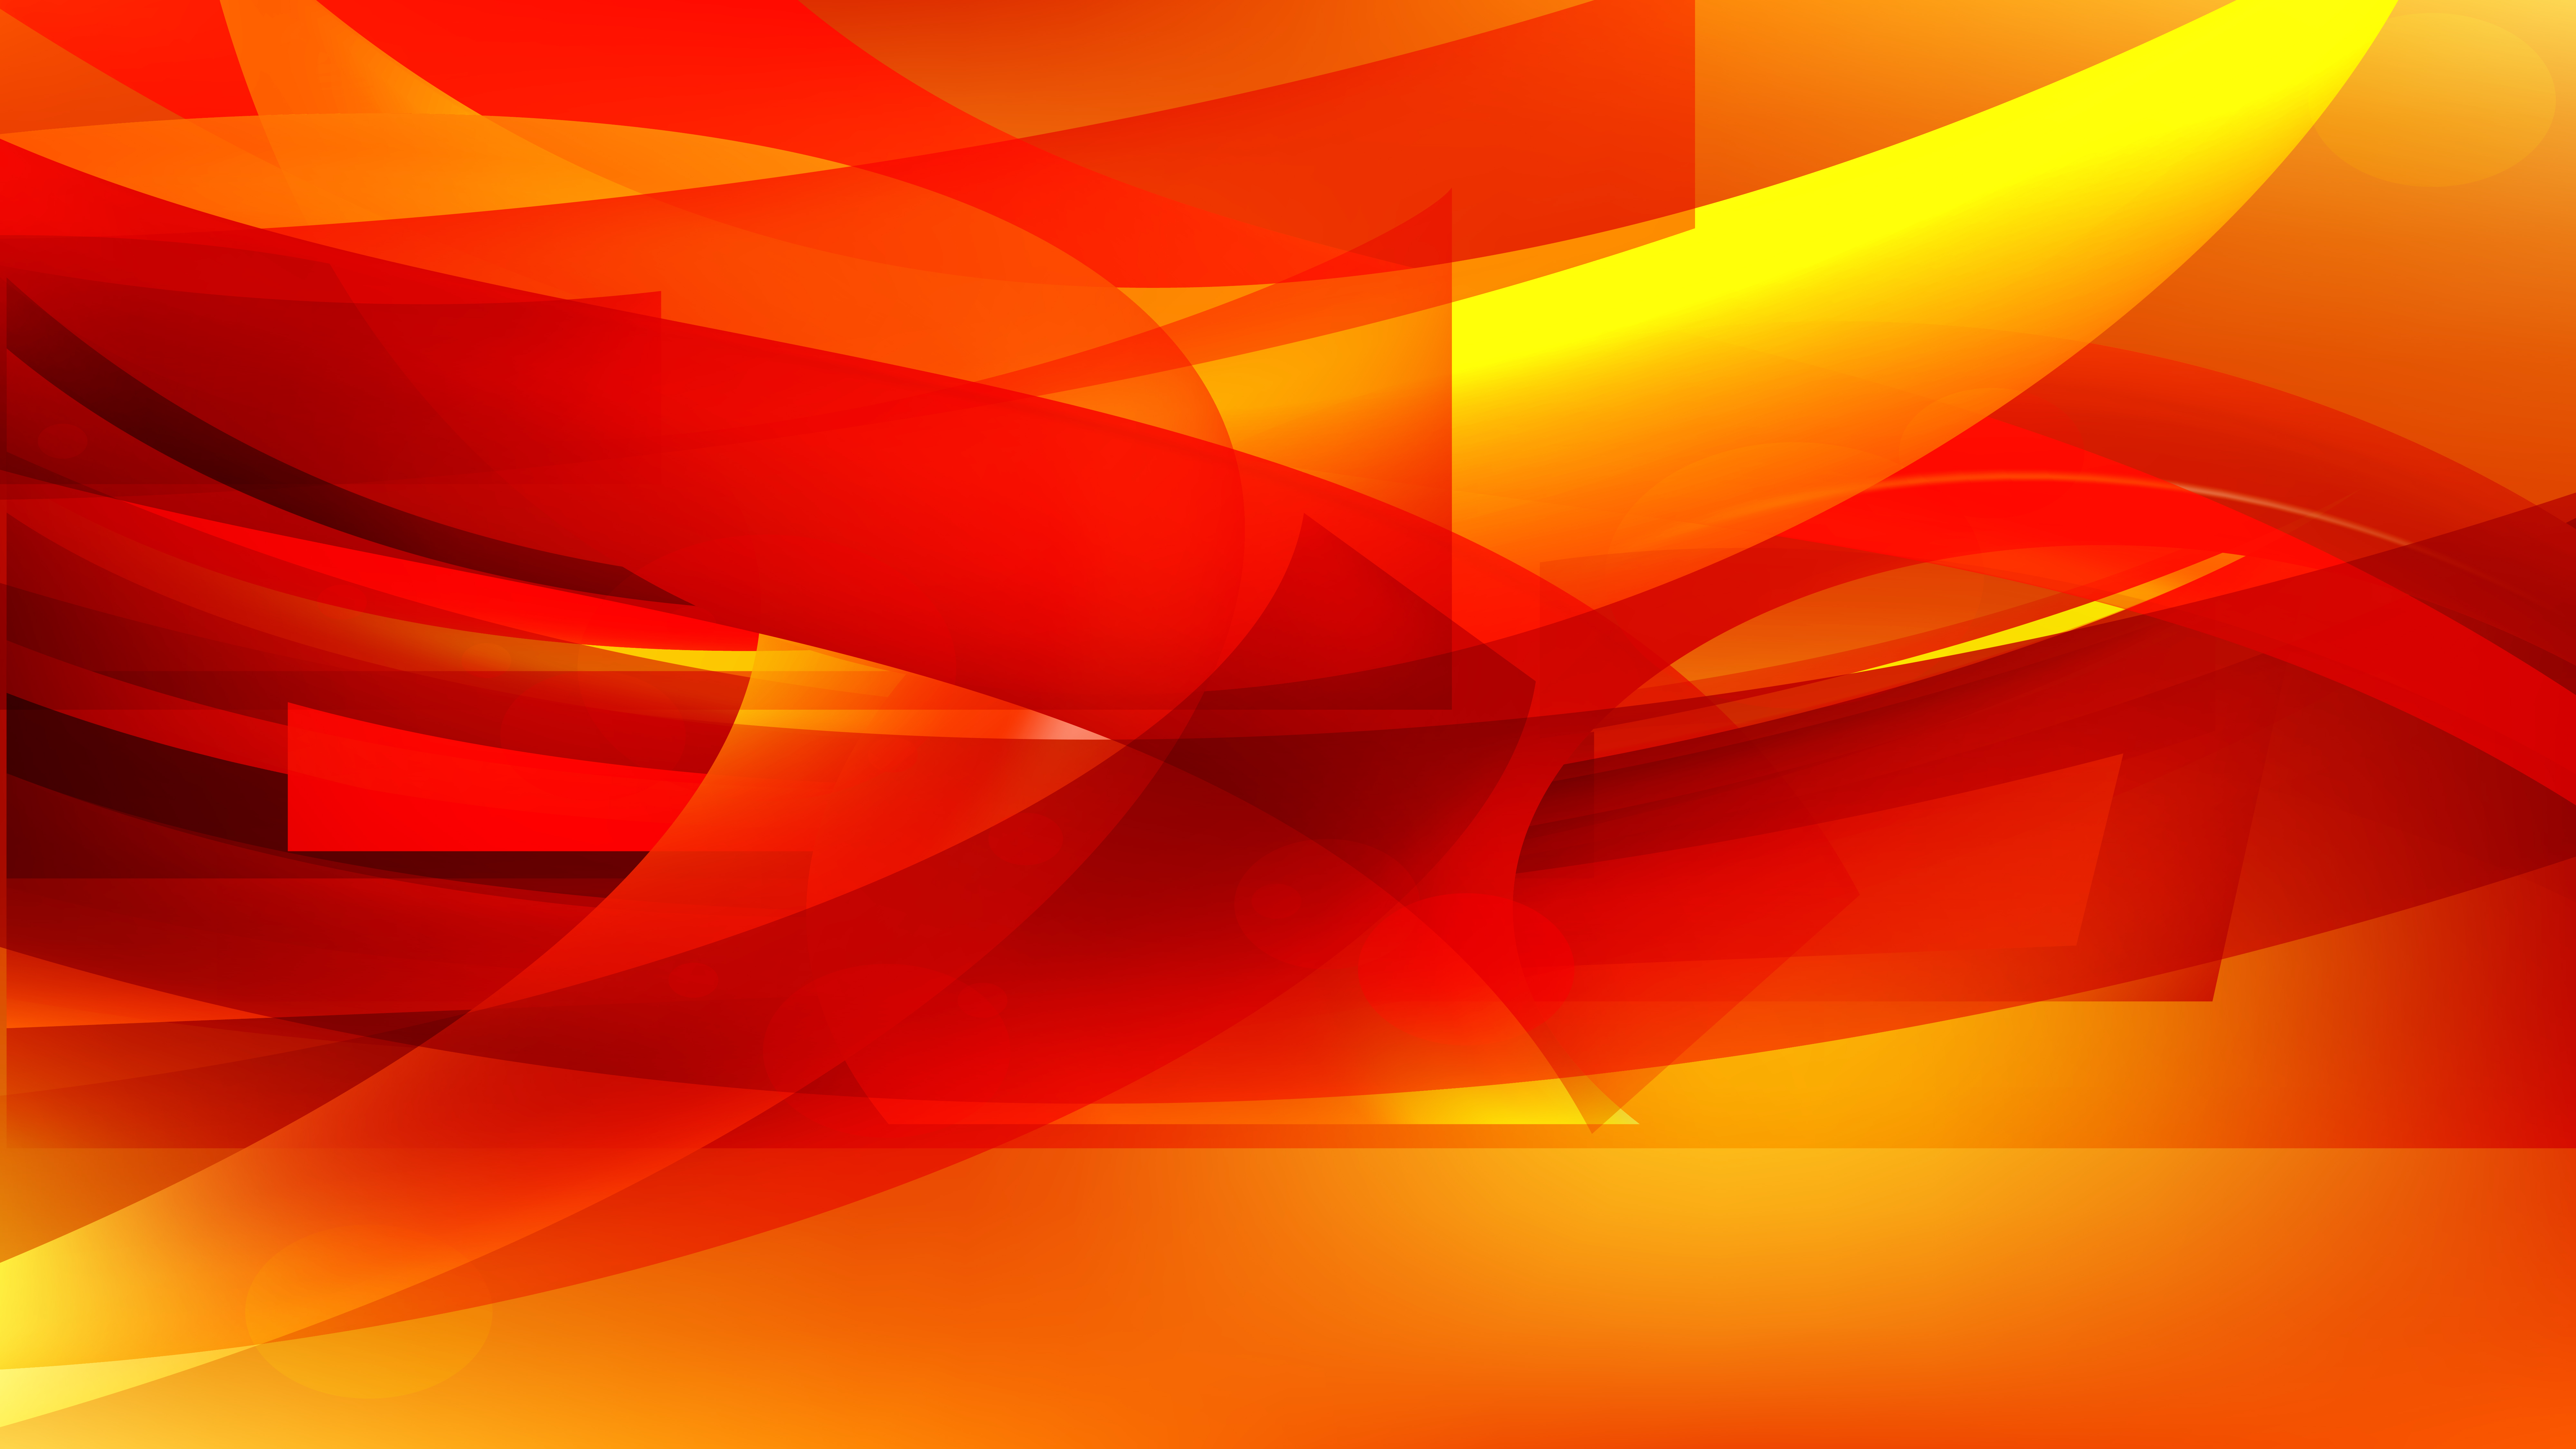 Free Abstract Red and Yellow Background Vector Illustration